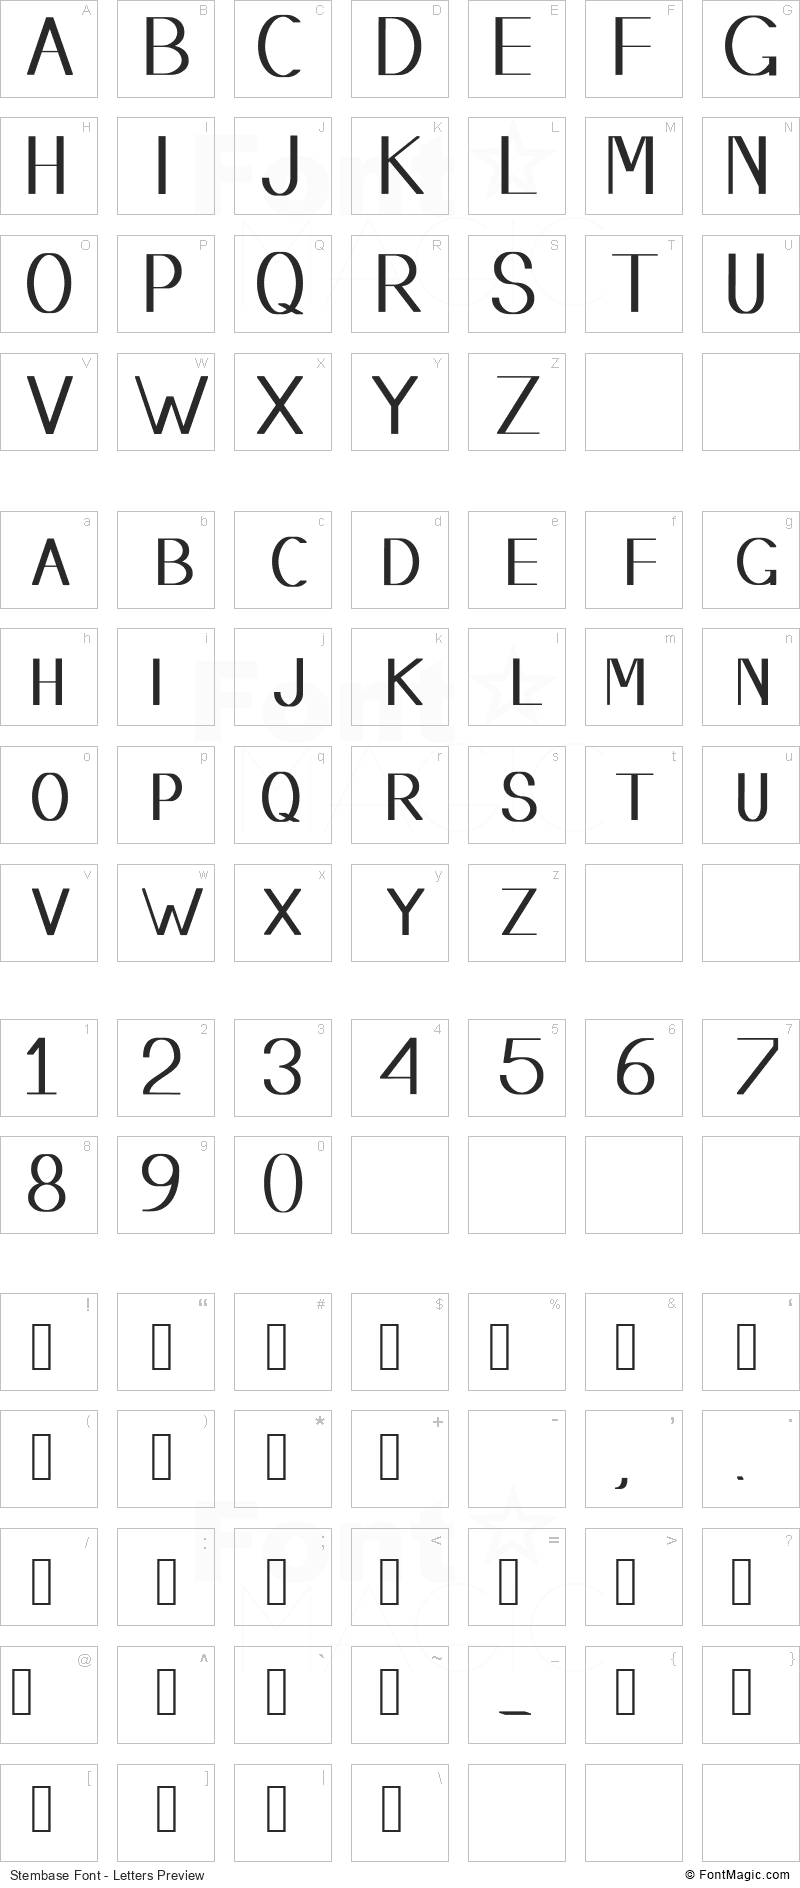 Stembase Font - All Latters Preview Chart